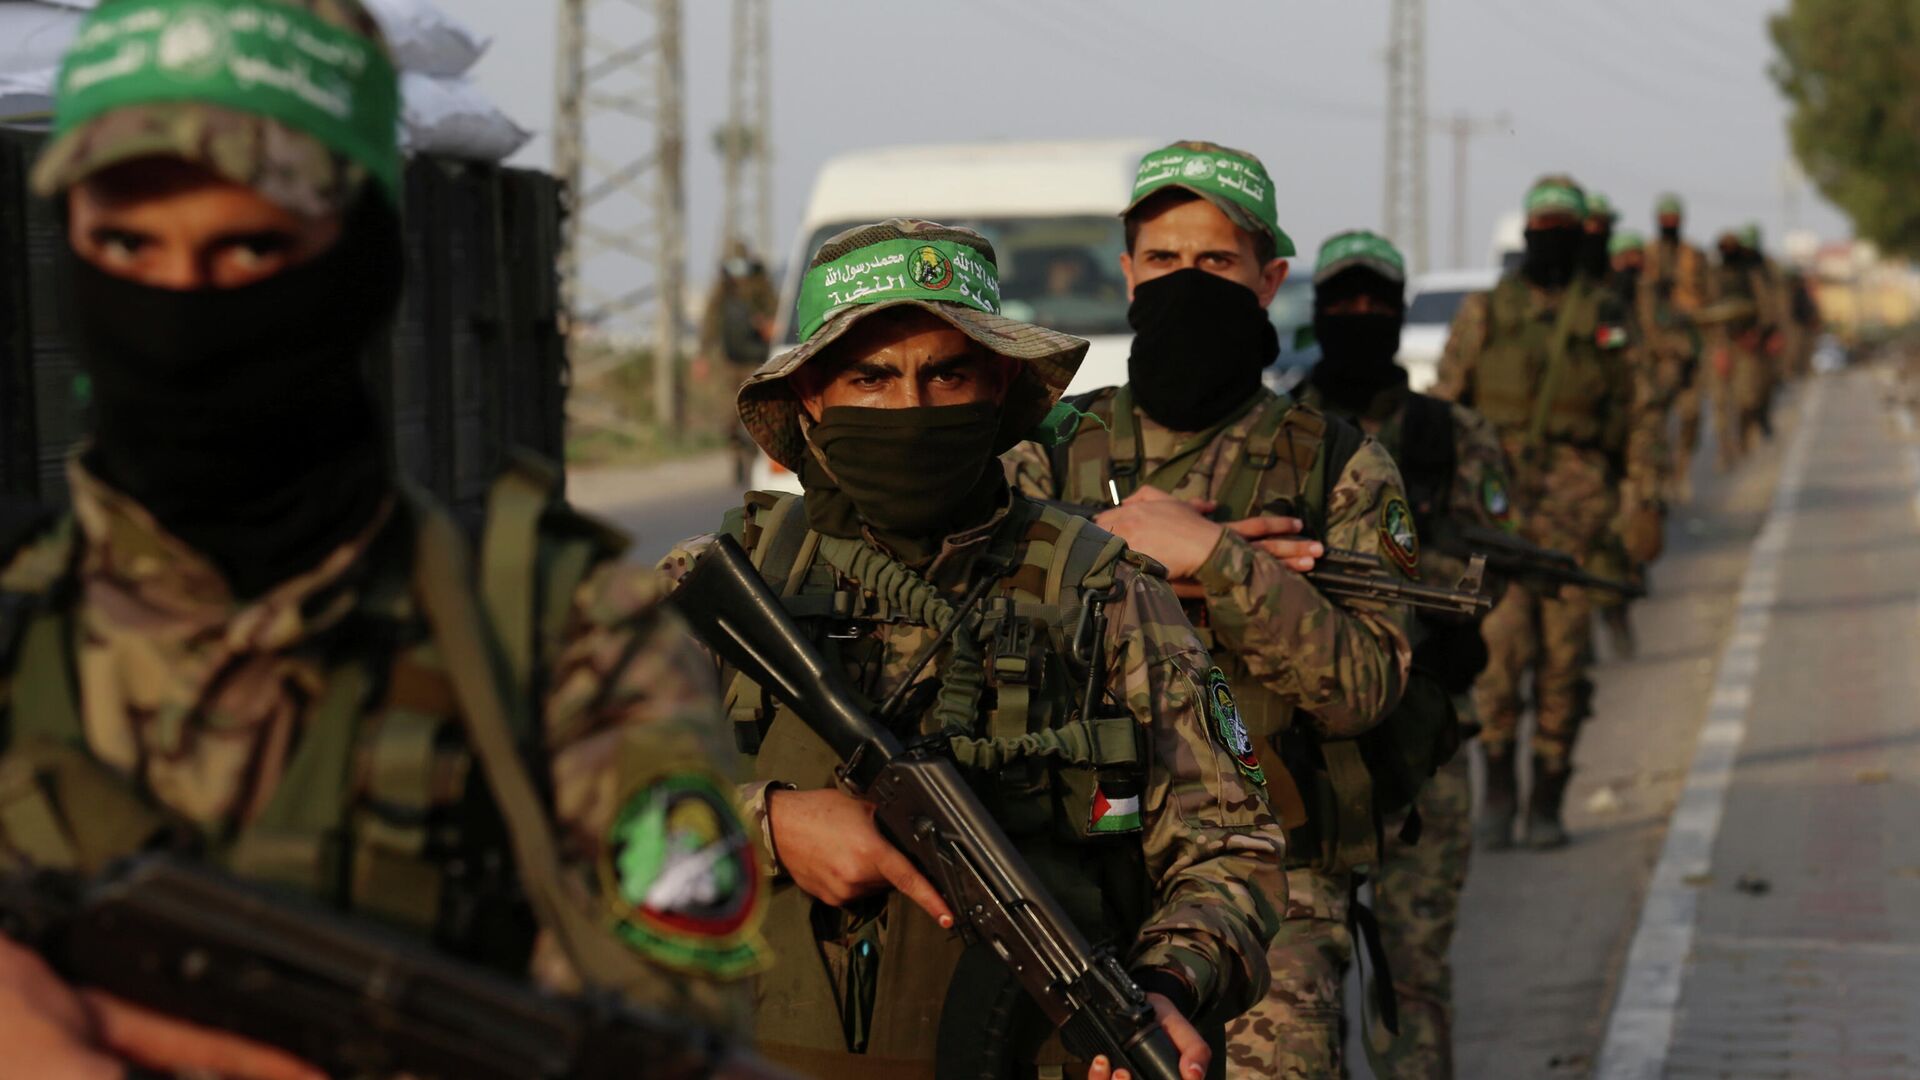 Masked militants from the Izzedine al-Qassam Brigades, a military wing of Hamas, march with their rifles along the main road of the Nusseirat refugee camp, central Gaza Strip, Thursday, 28 October 2021. - Sputnik International, 1920, 24.03.2022